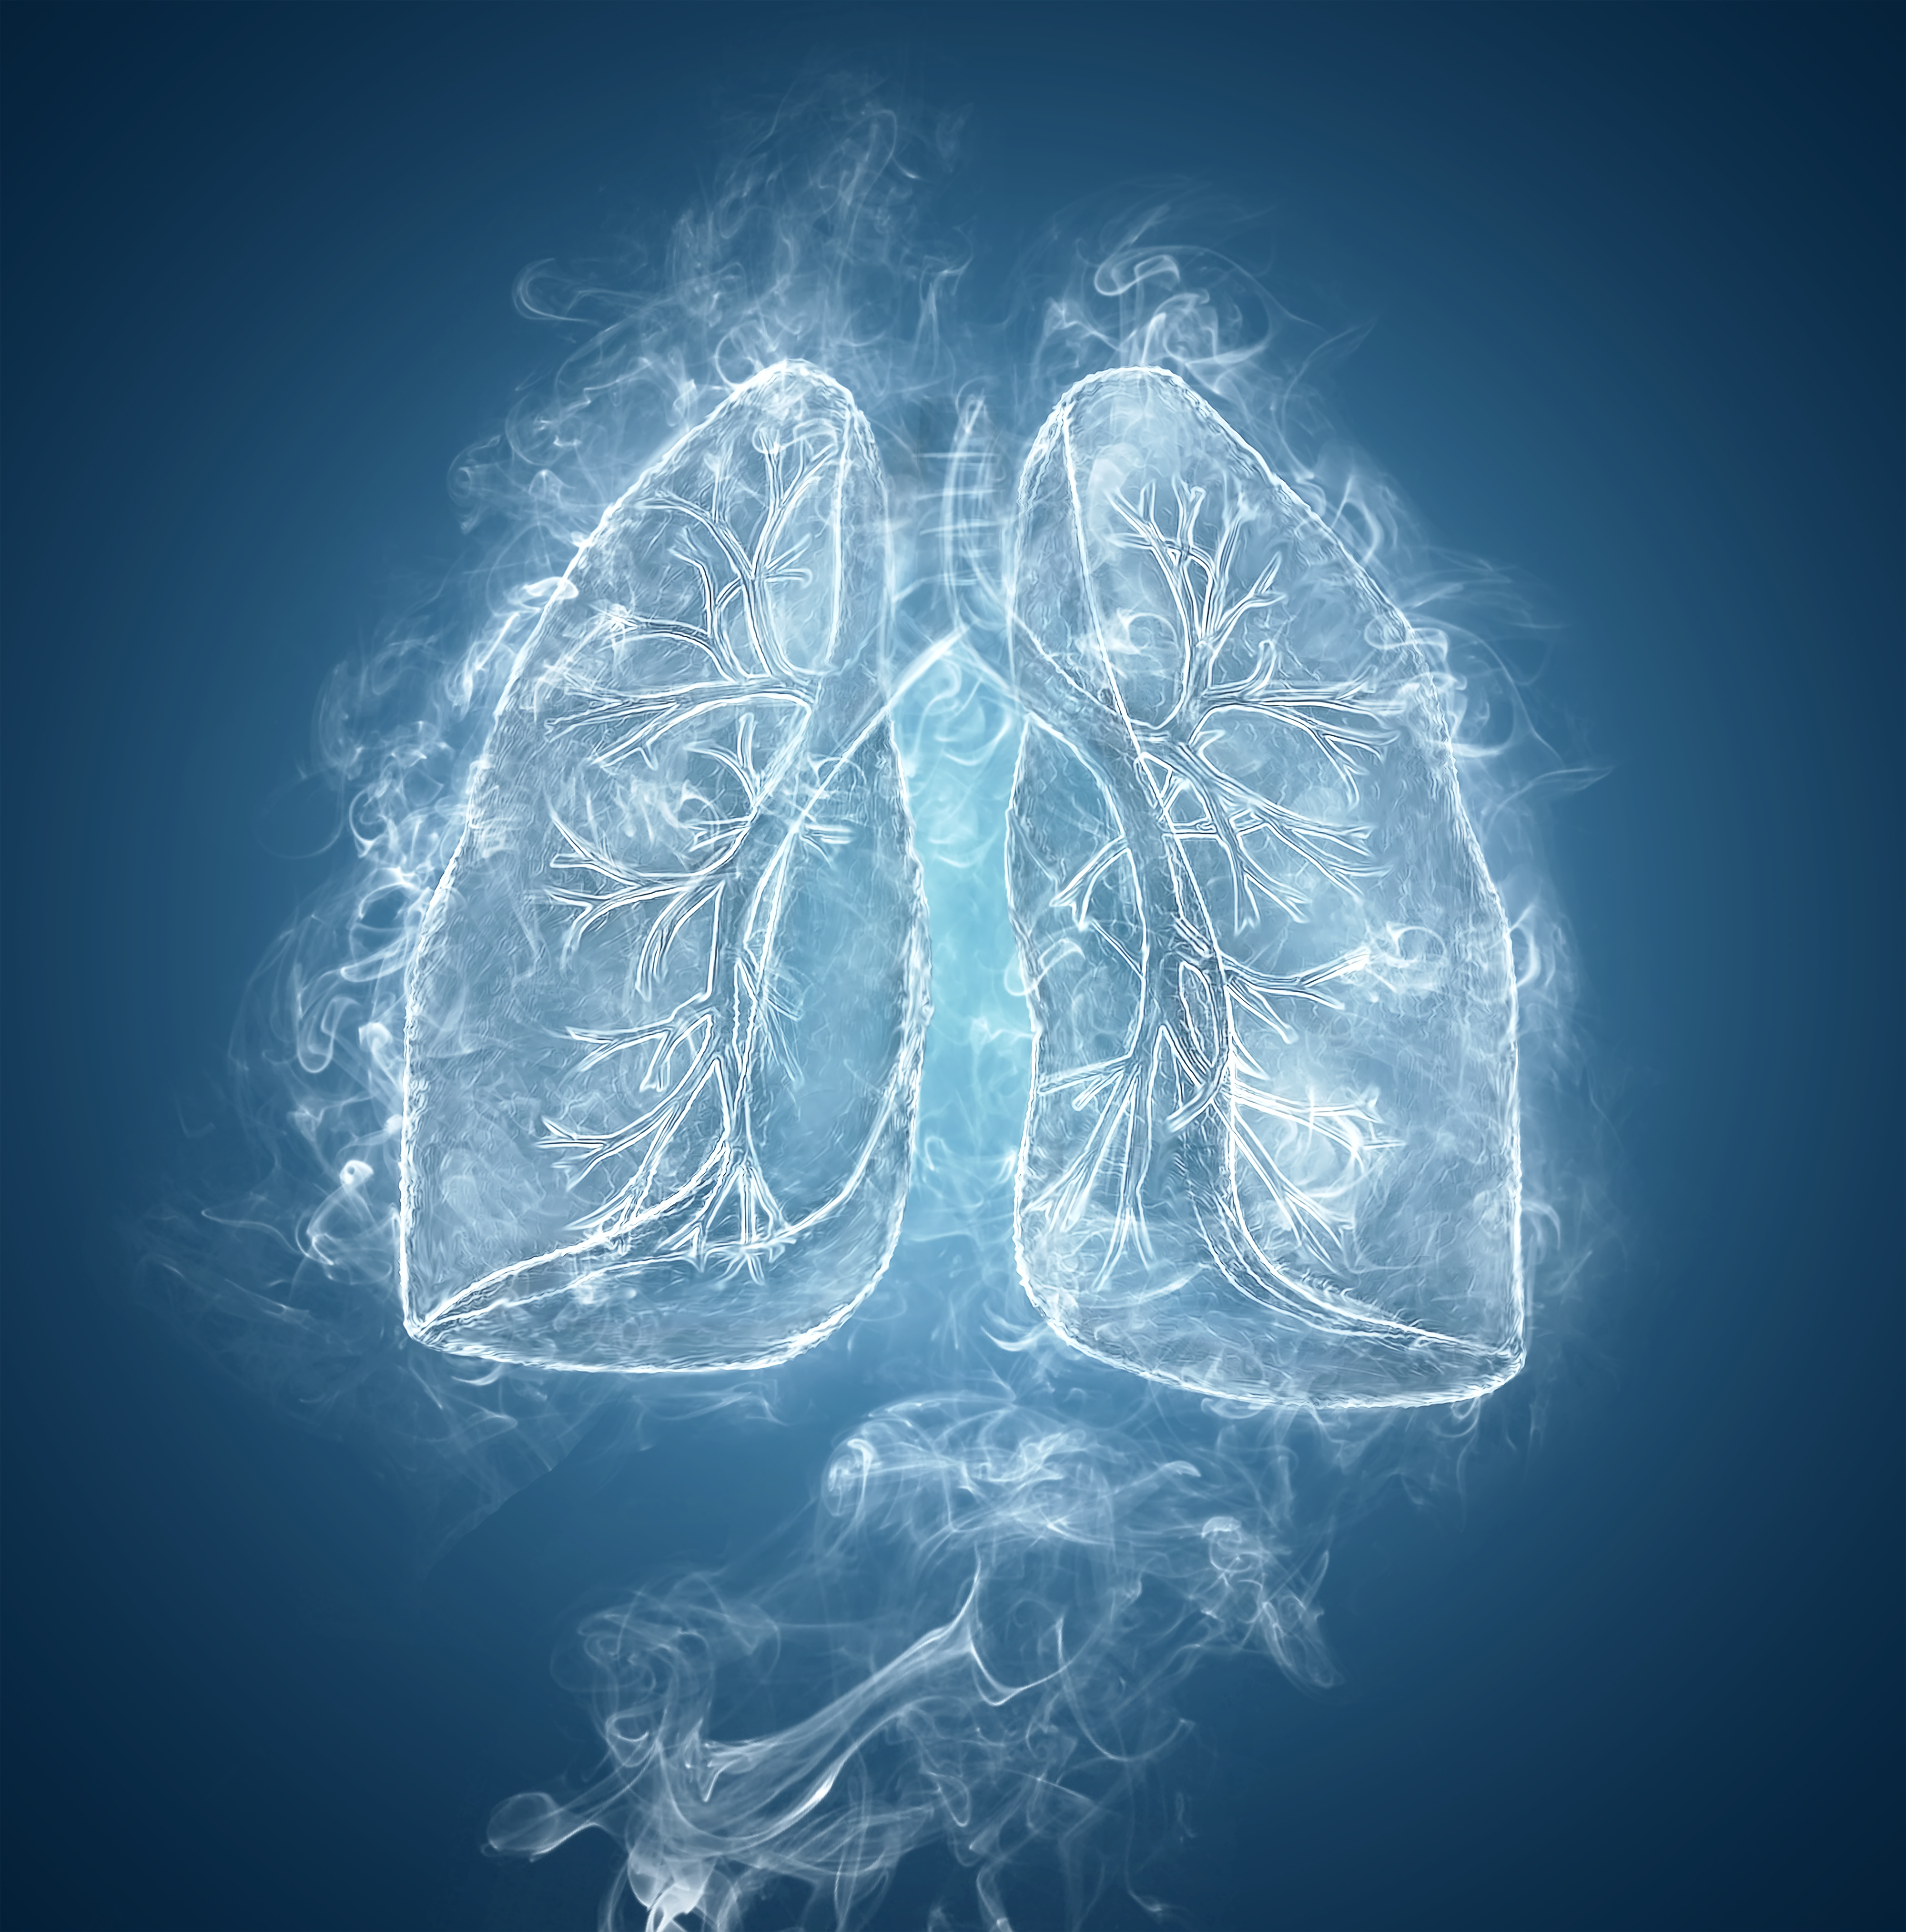 Draft Opinion released by the European Medicines Agency on Two Patient-Reported Outcome (PRO) tools for COPD treatments evaluation